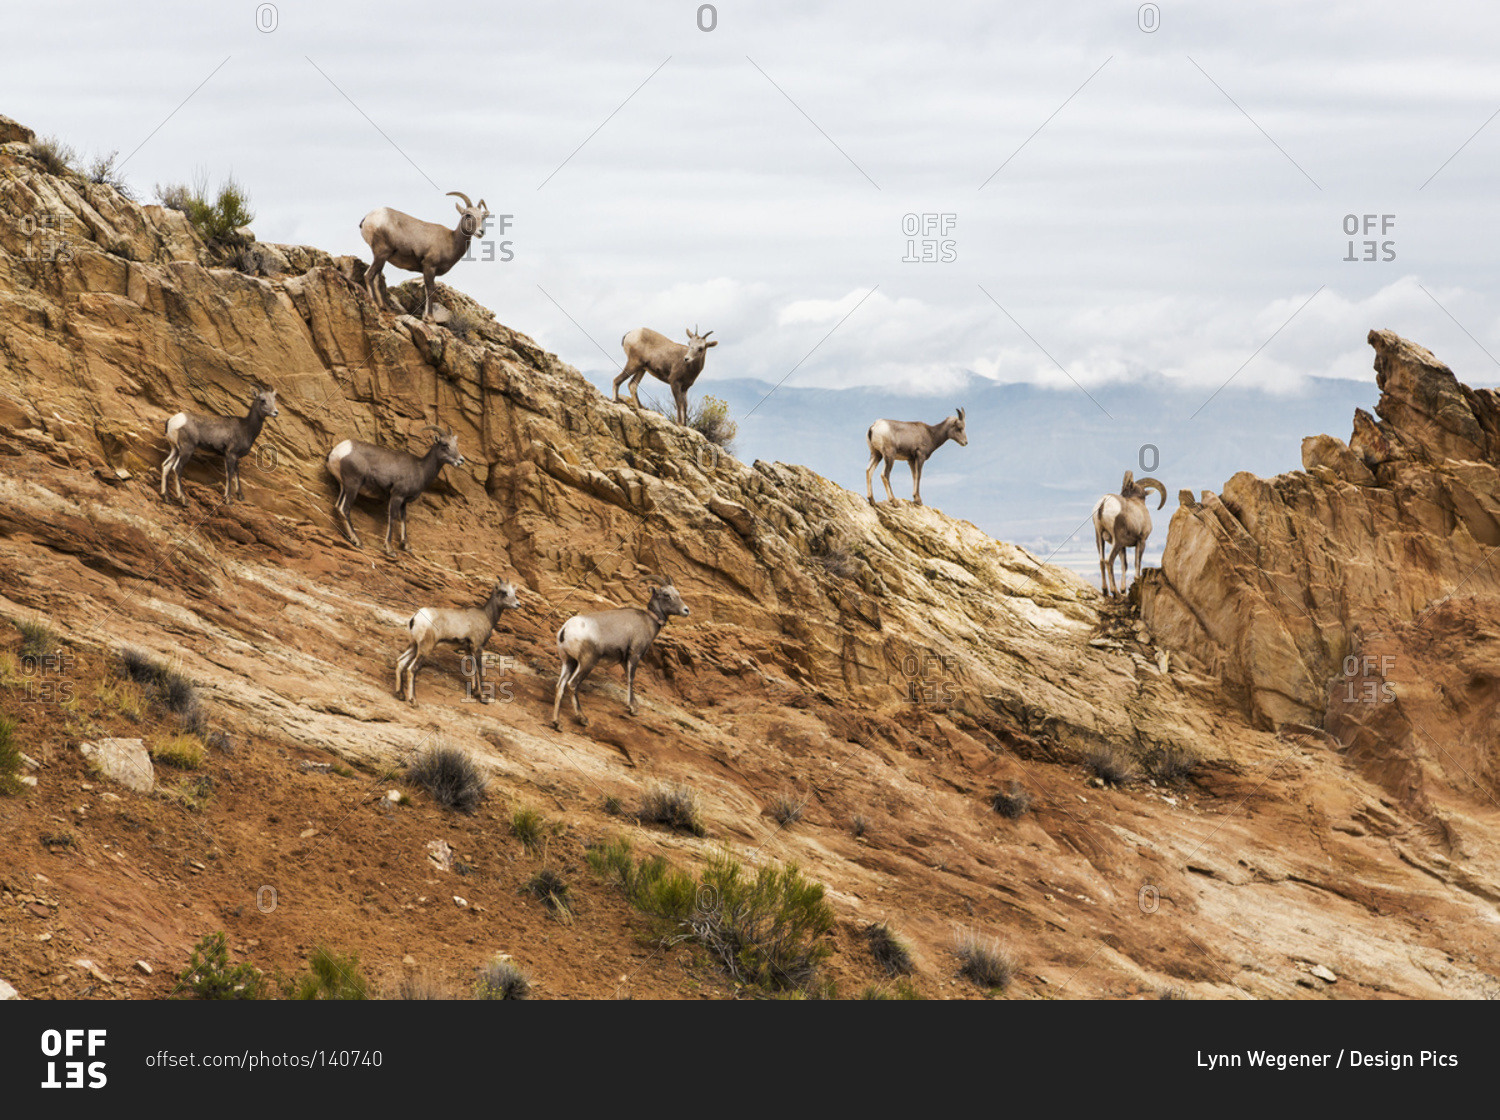 A herd of desert Bighorn sheep (Ovis canadensis) ewes and rams standing on a rocky hillside in the Colorado National Monument in autumn